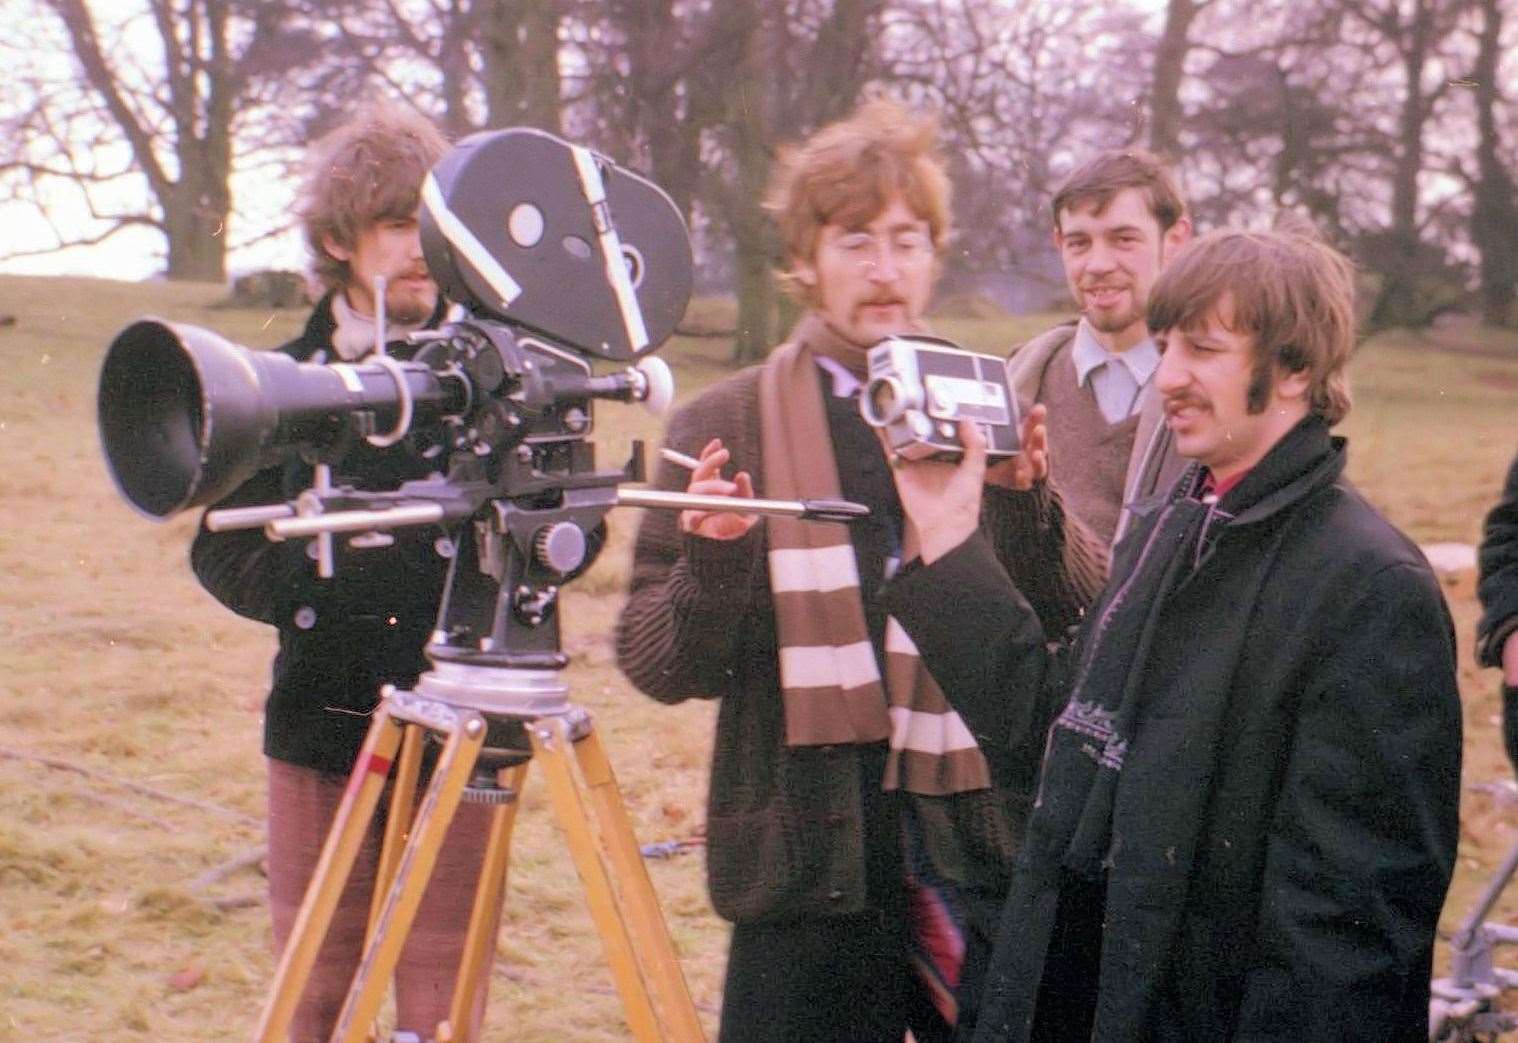 The Beatles when they visited Knole Park, Sevenoaks to shoot promotional films for Penny Lane and Strawberry Fields Forever in January 1967. Picture: Tracks